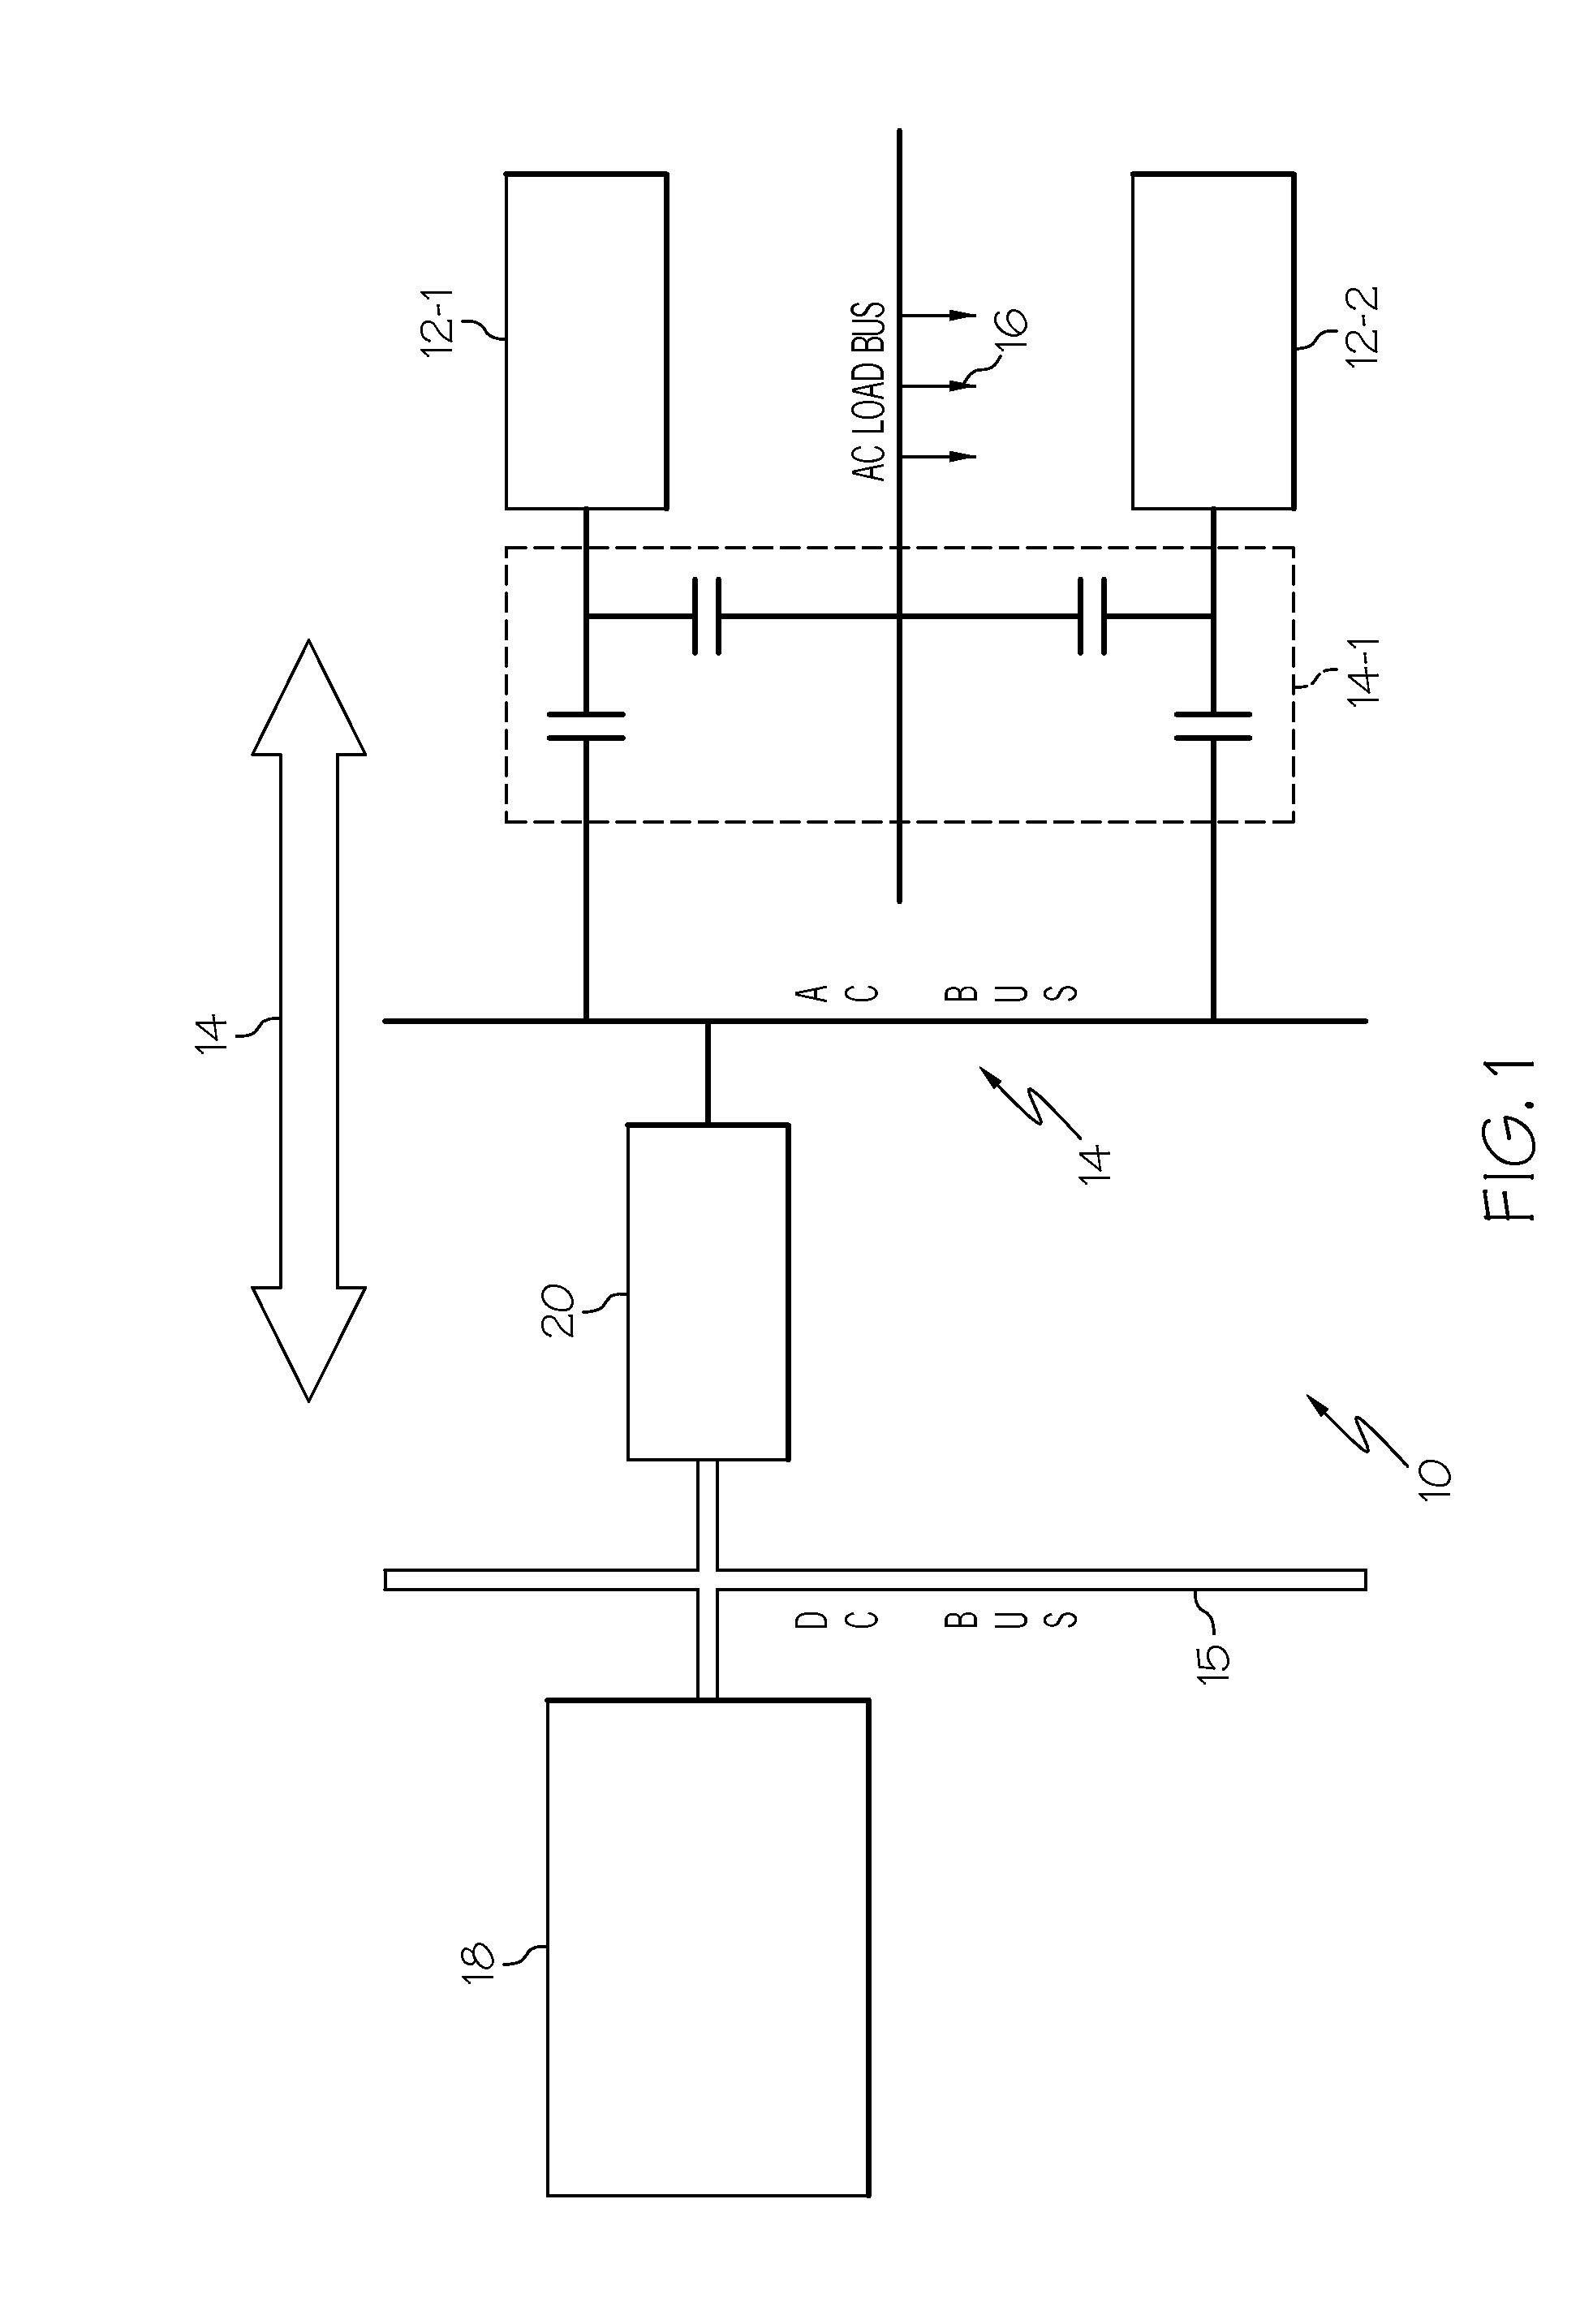 Electric accumulators having self regulated battery with integrated bi-directional power management and protection